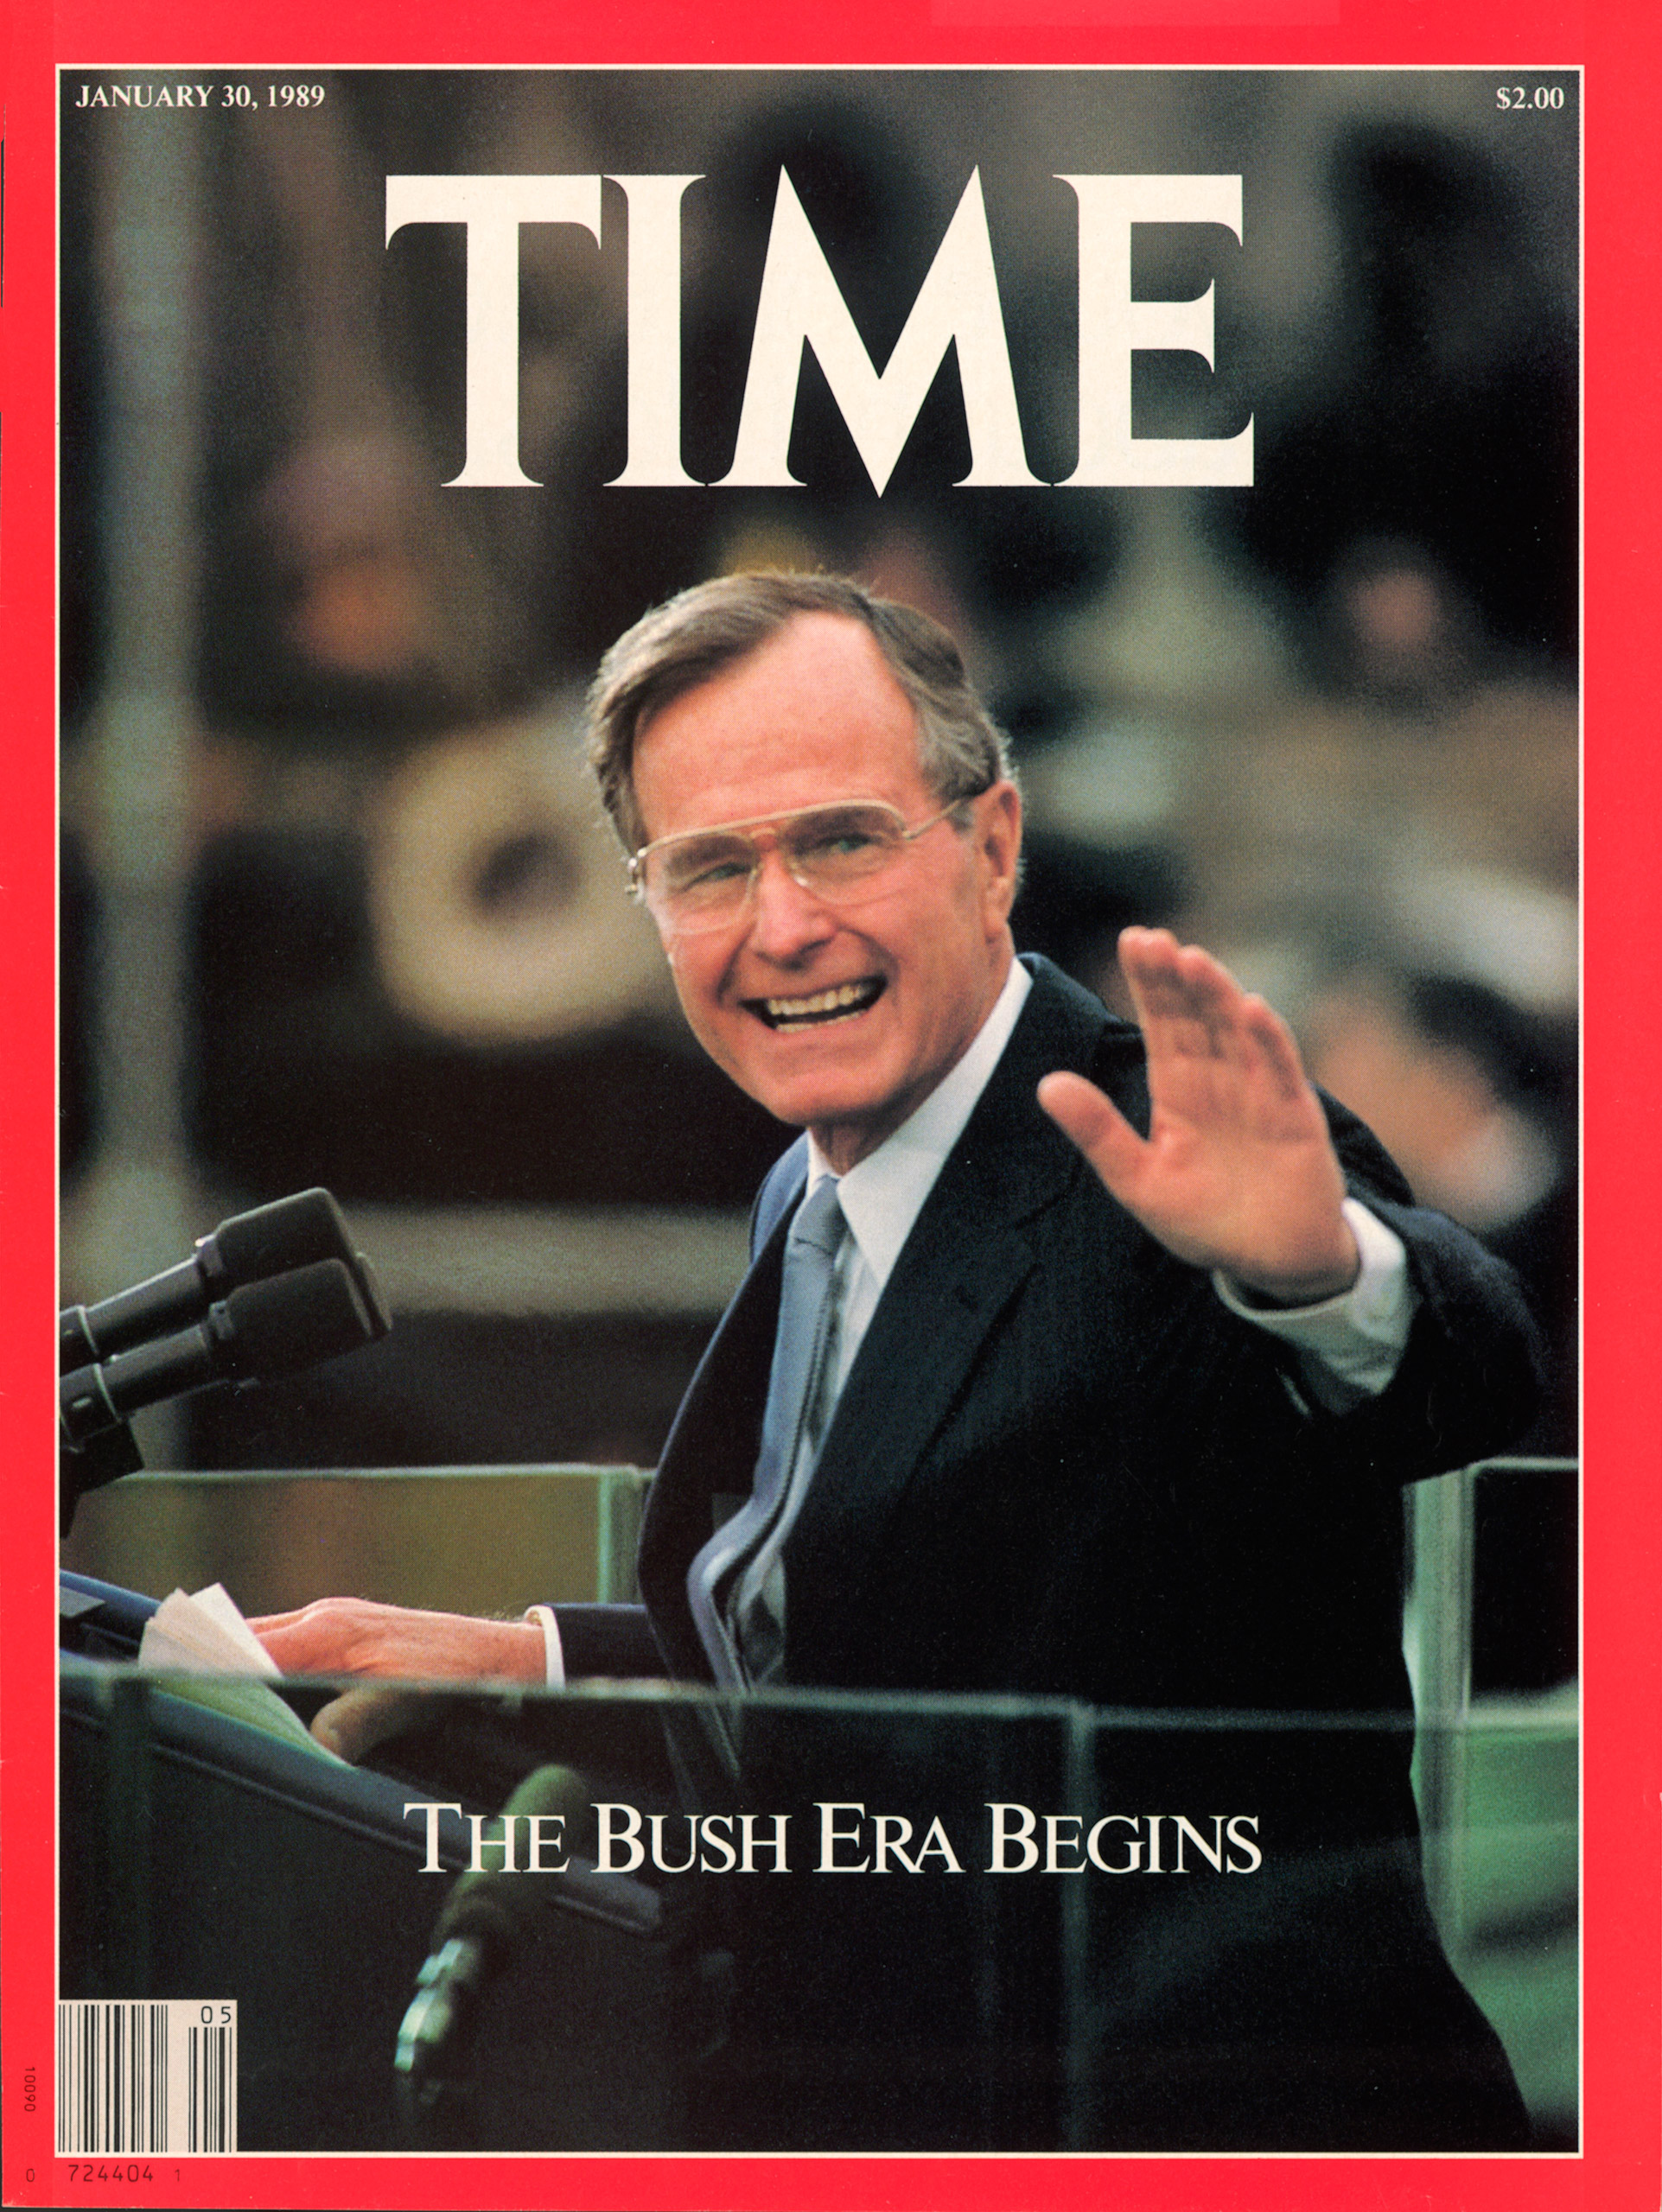 George H.W. Bush on the Jan. 30, 1989, cover of TIME. Photo credit by Dirck Halstead.